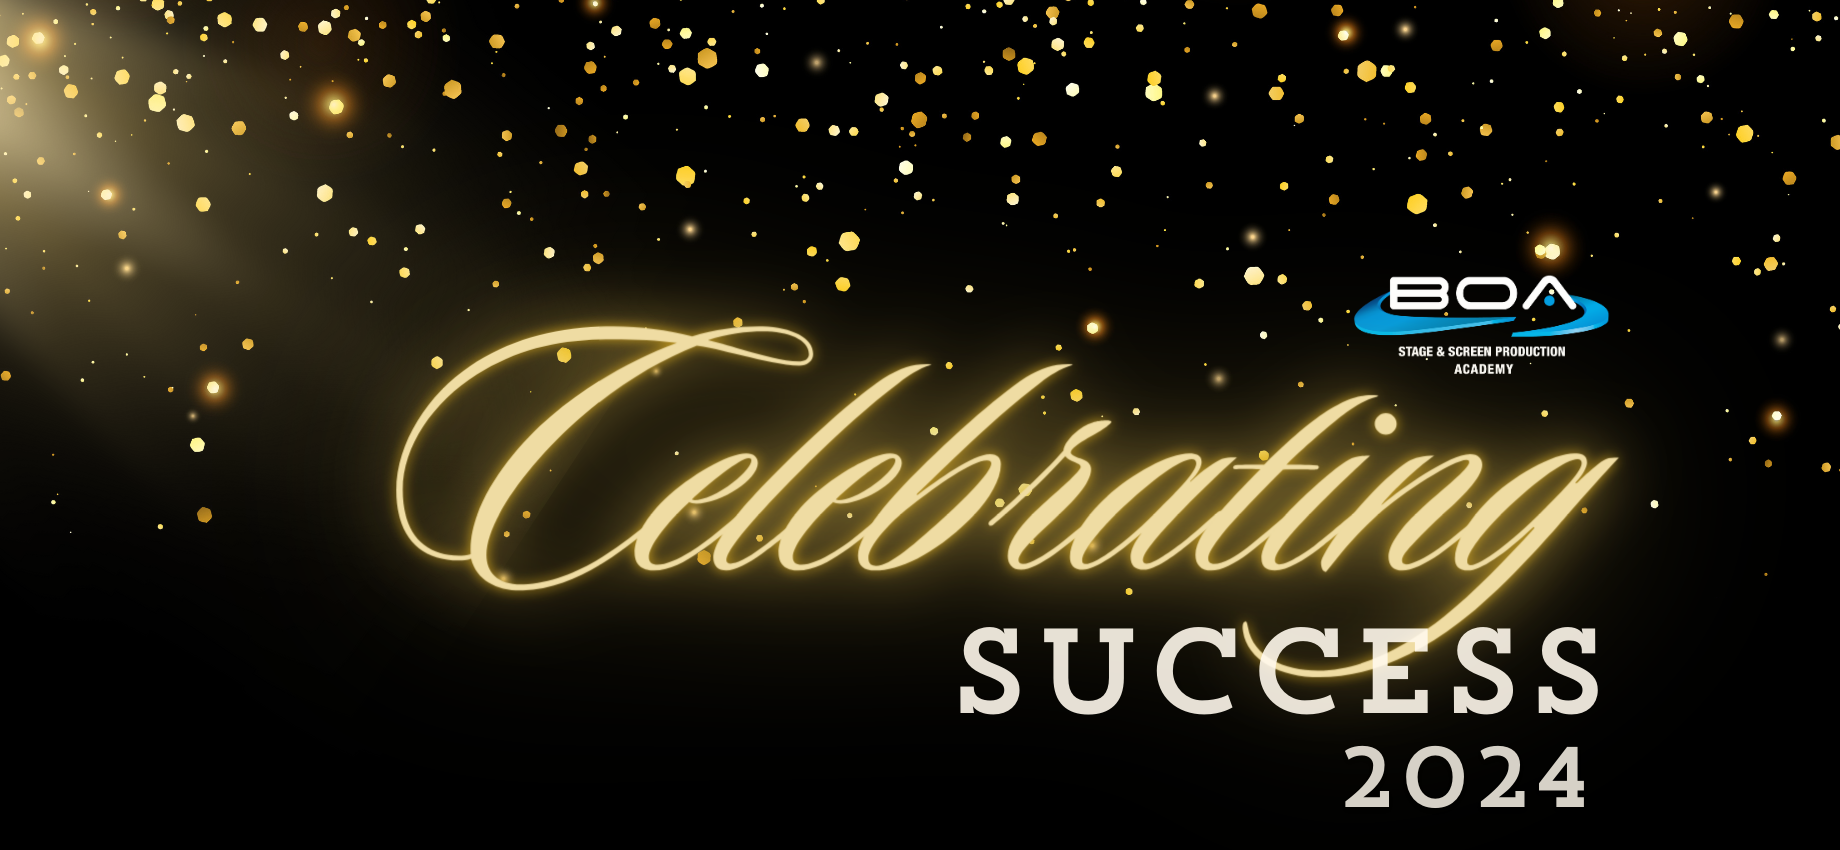 BOA Stage and Screen Production Academy: Celebrating Success Awards